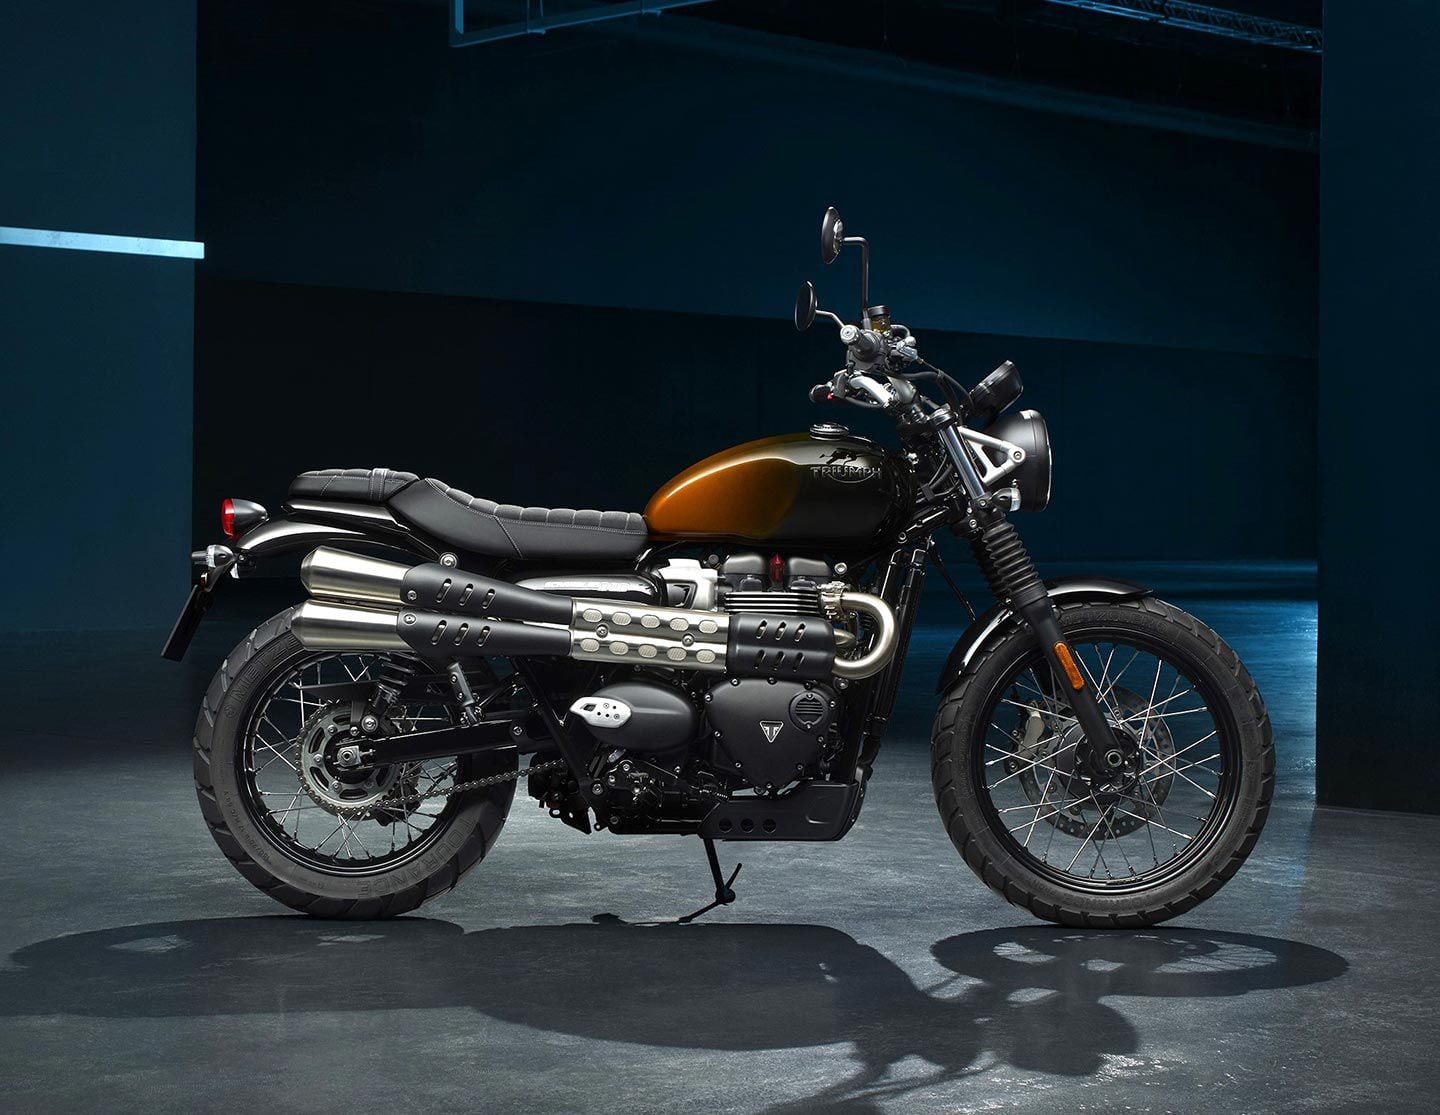 The Scrambler was always a looker, and in 2024 you can opt for the Scrambler 900 Orange Stealth Edition.